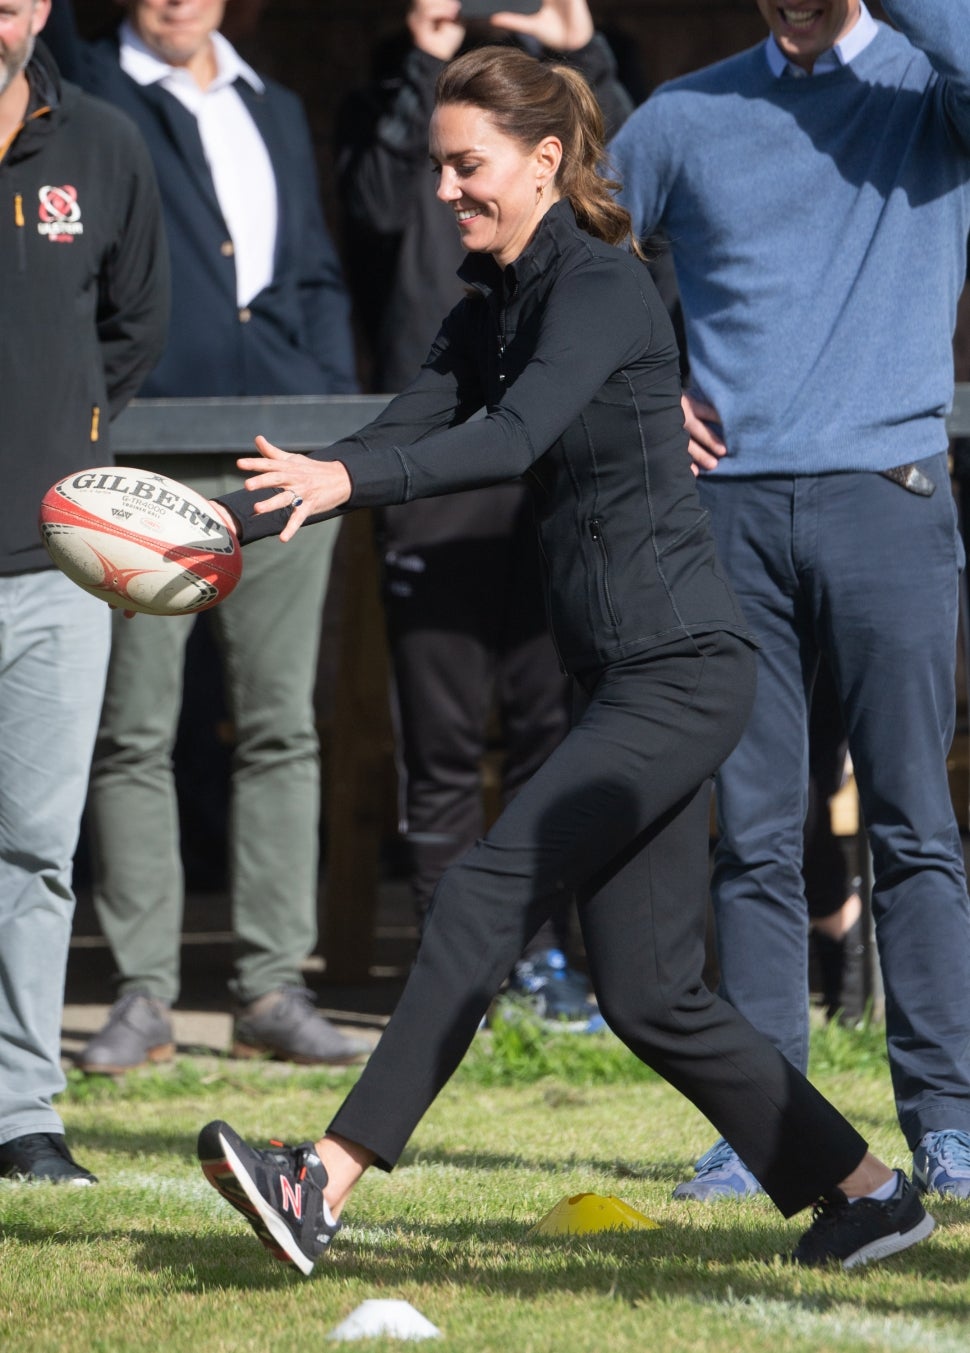 Catherine, Duchess of Cambridge kicks a rugby ball as she visits the City of Derry Rugby Club on September 29, 2021 in Londonderry, Northern Ireland.